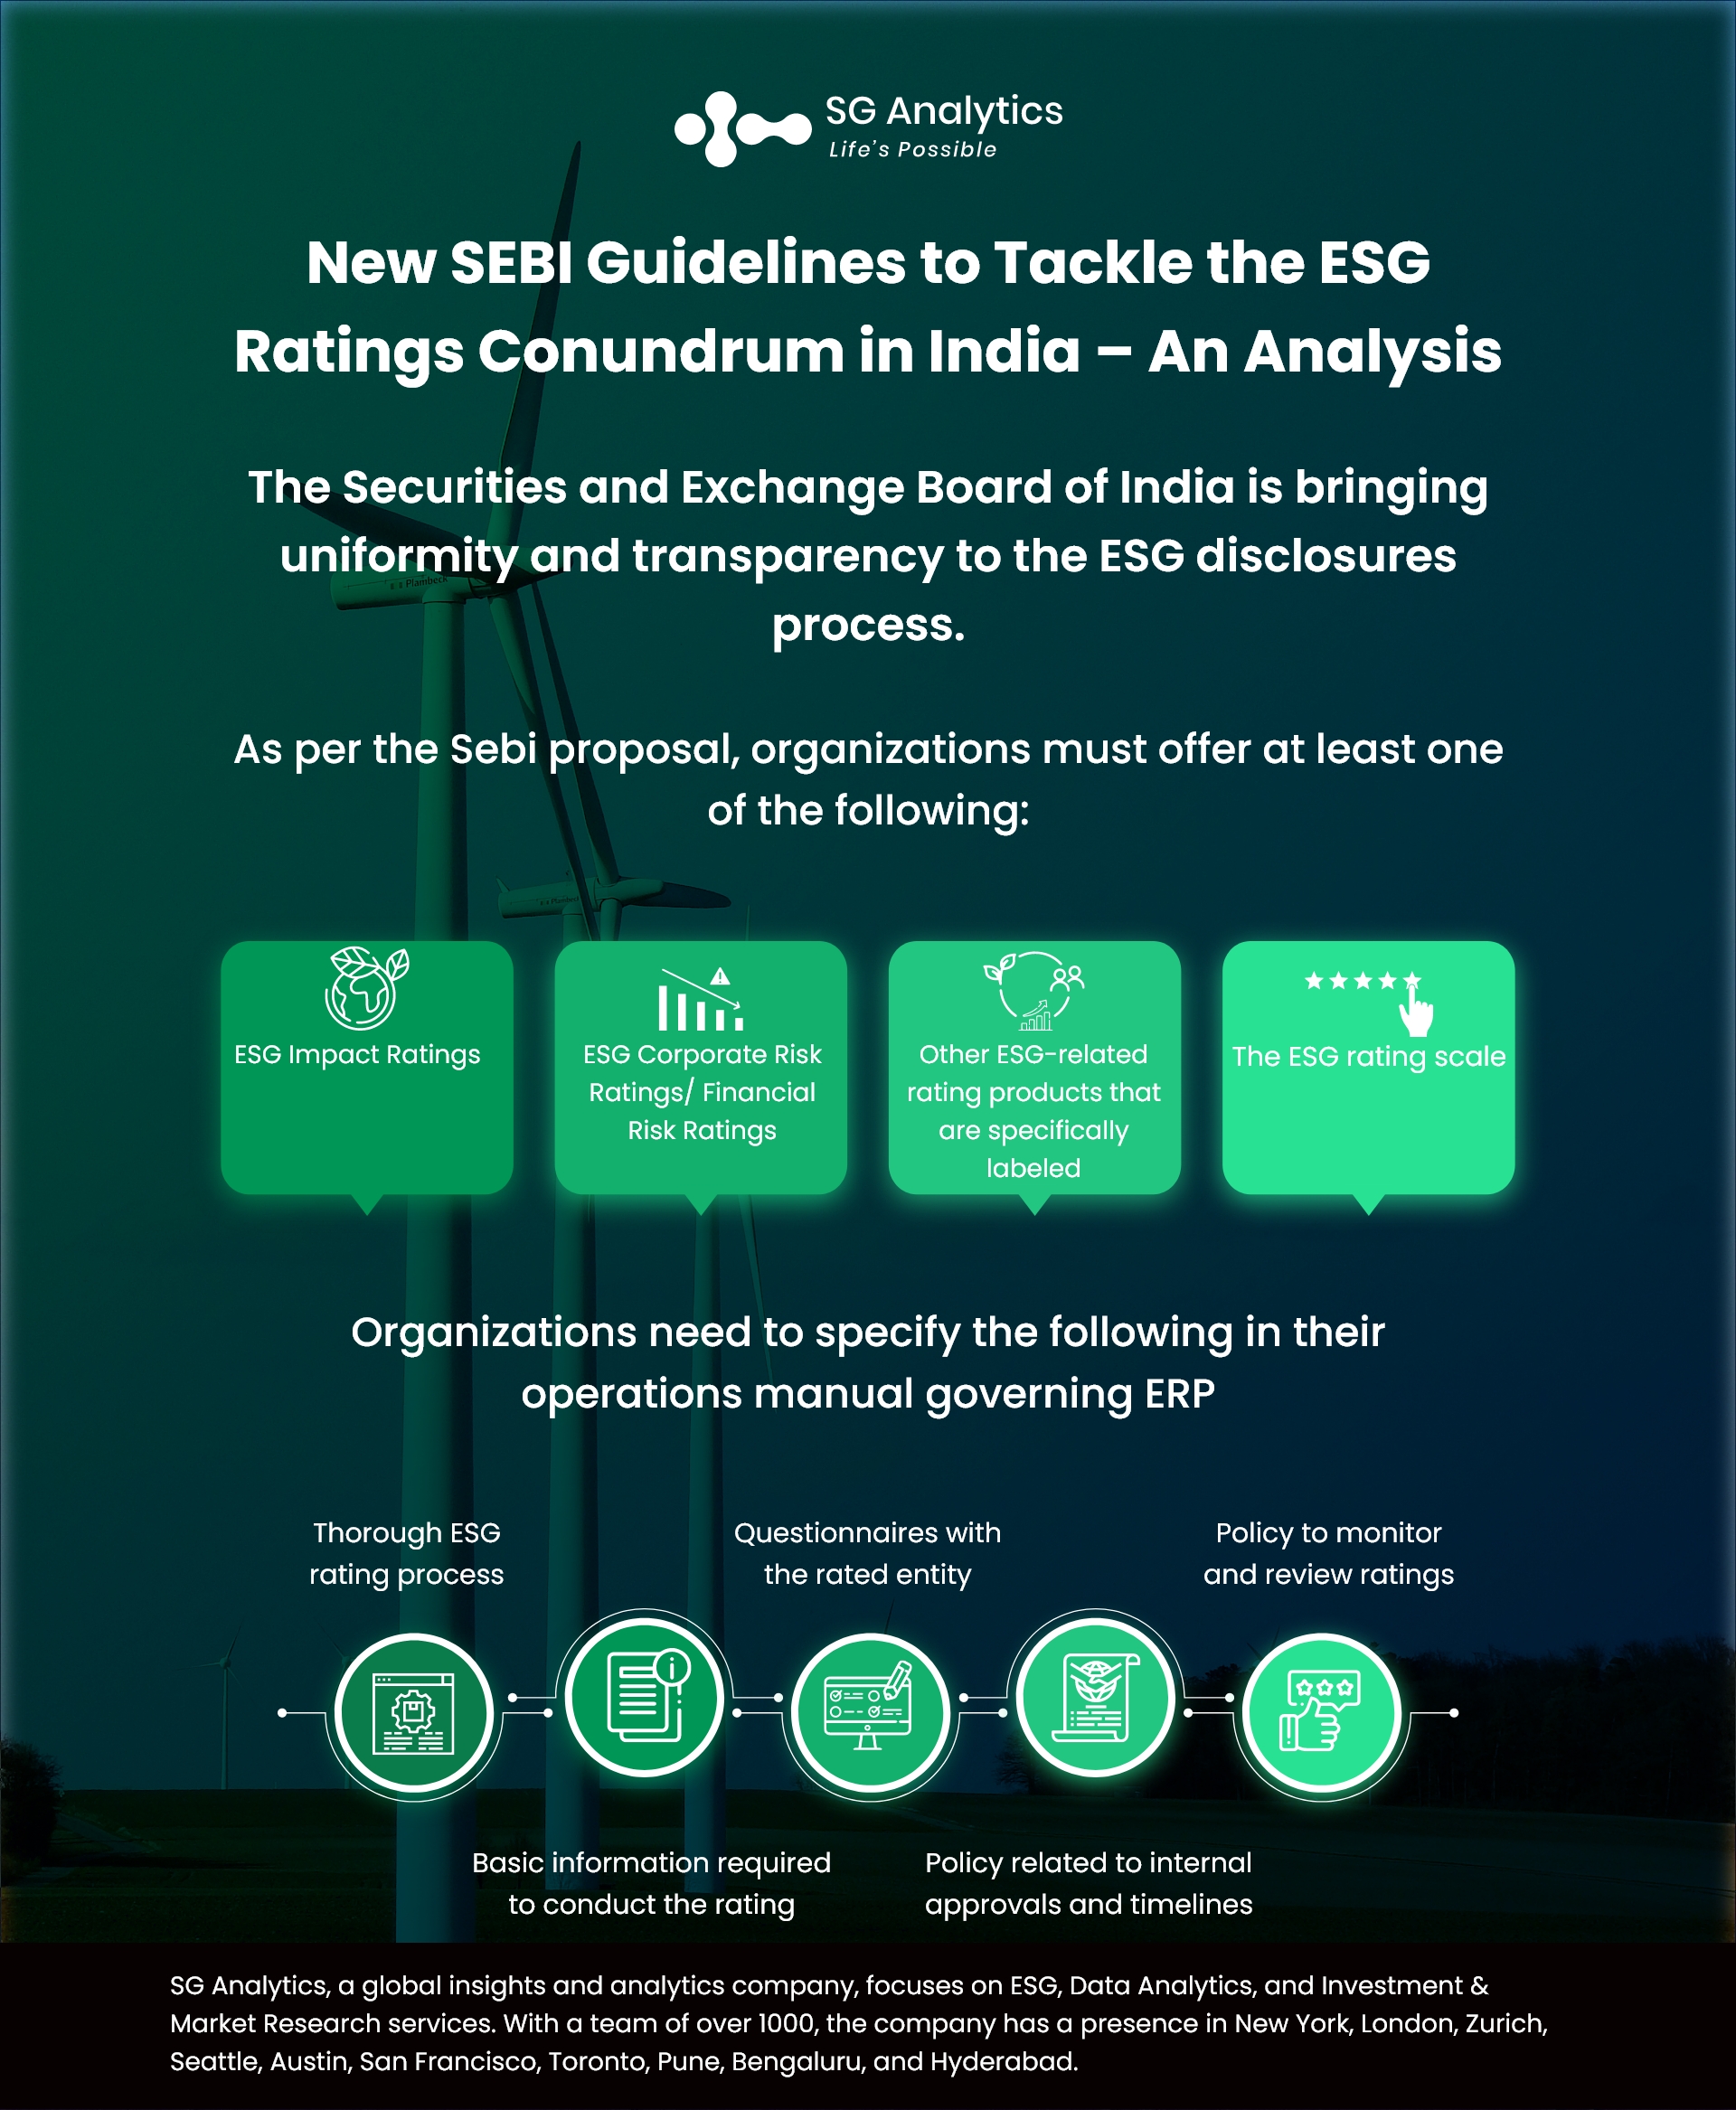 SG Analytics - SEBI Guidelines to tackle ESG Rating Conundrum in India